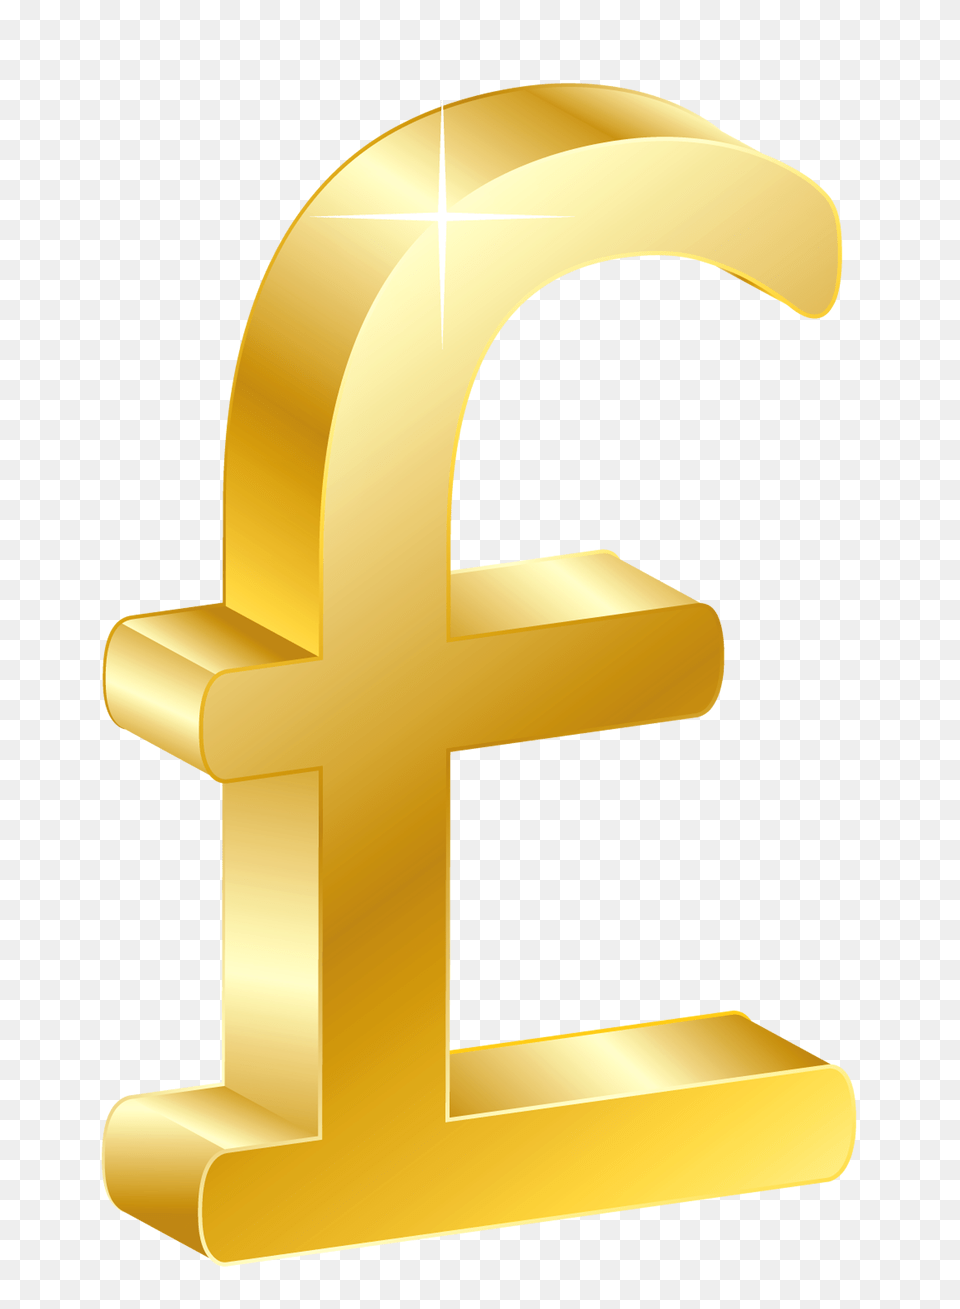 Money Pound Sterling Clip Art, Gold, Text Png